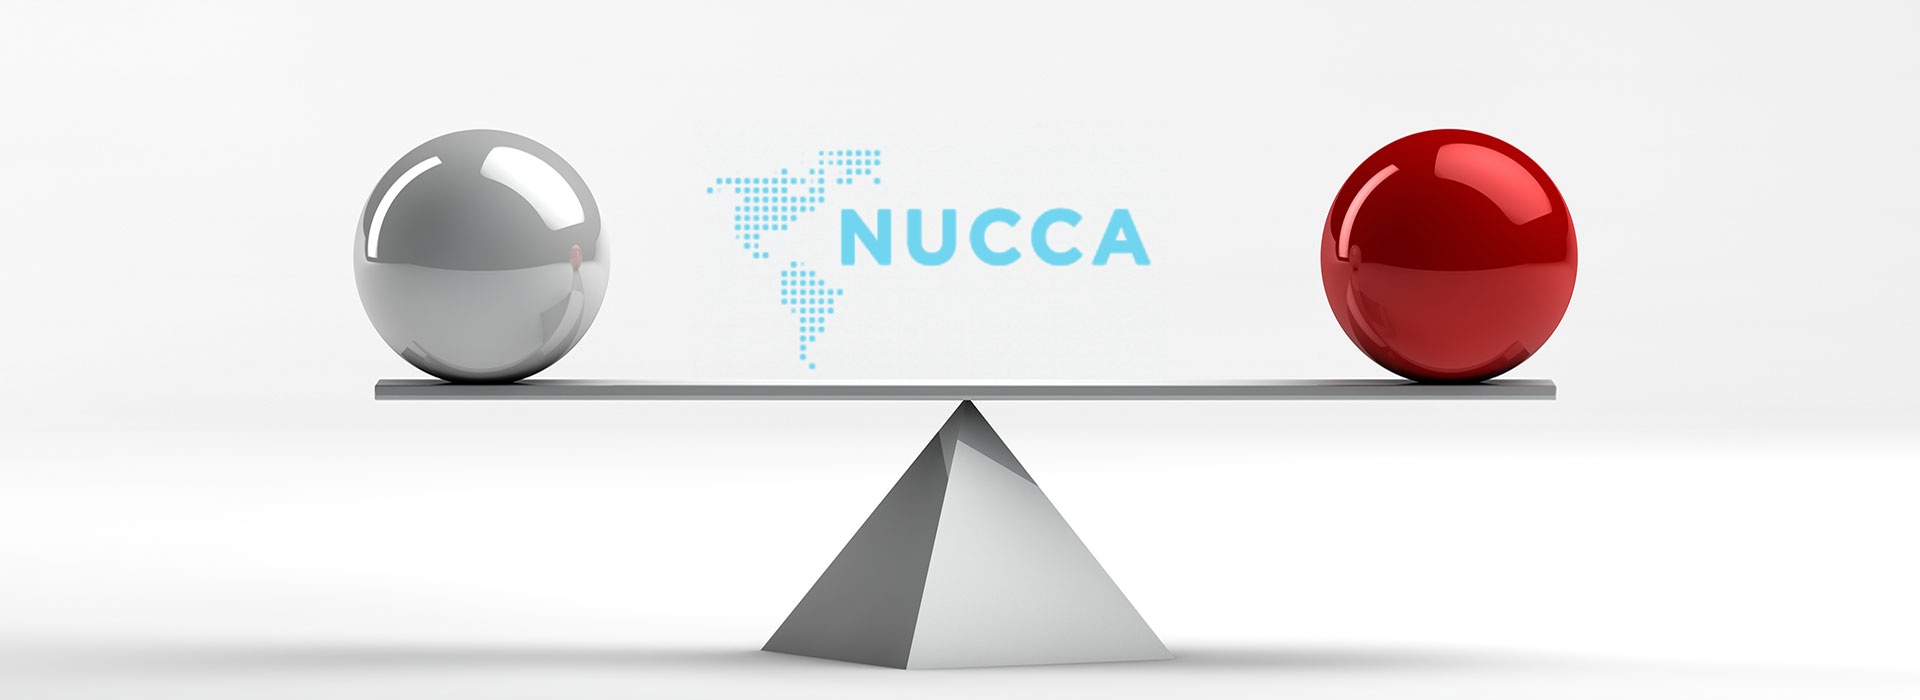 Dr. Michelle Speranza is an Airdrie chiropractor specializing in Upper Cervical Care, known as a NUCCA process